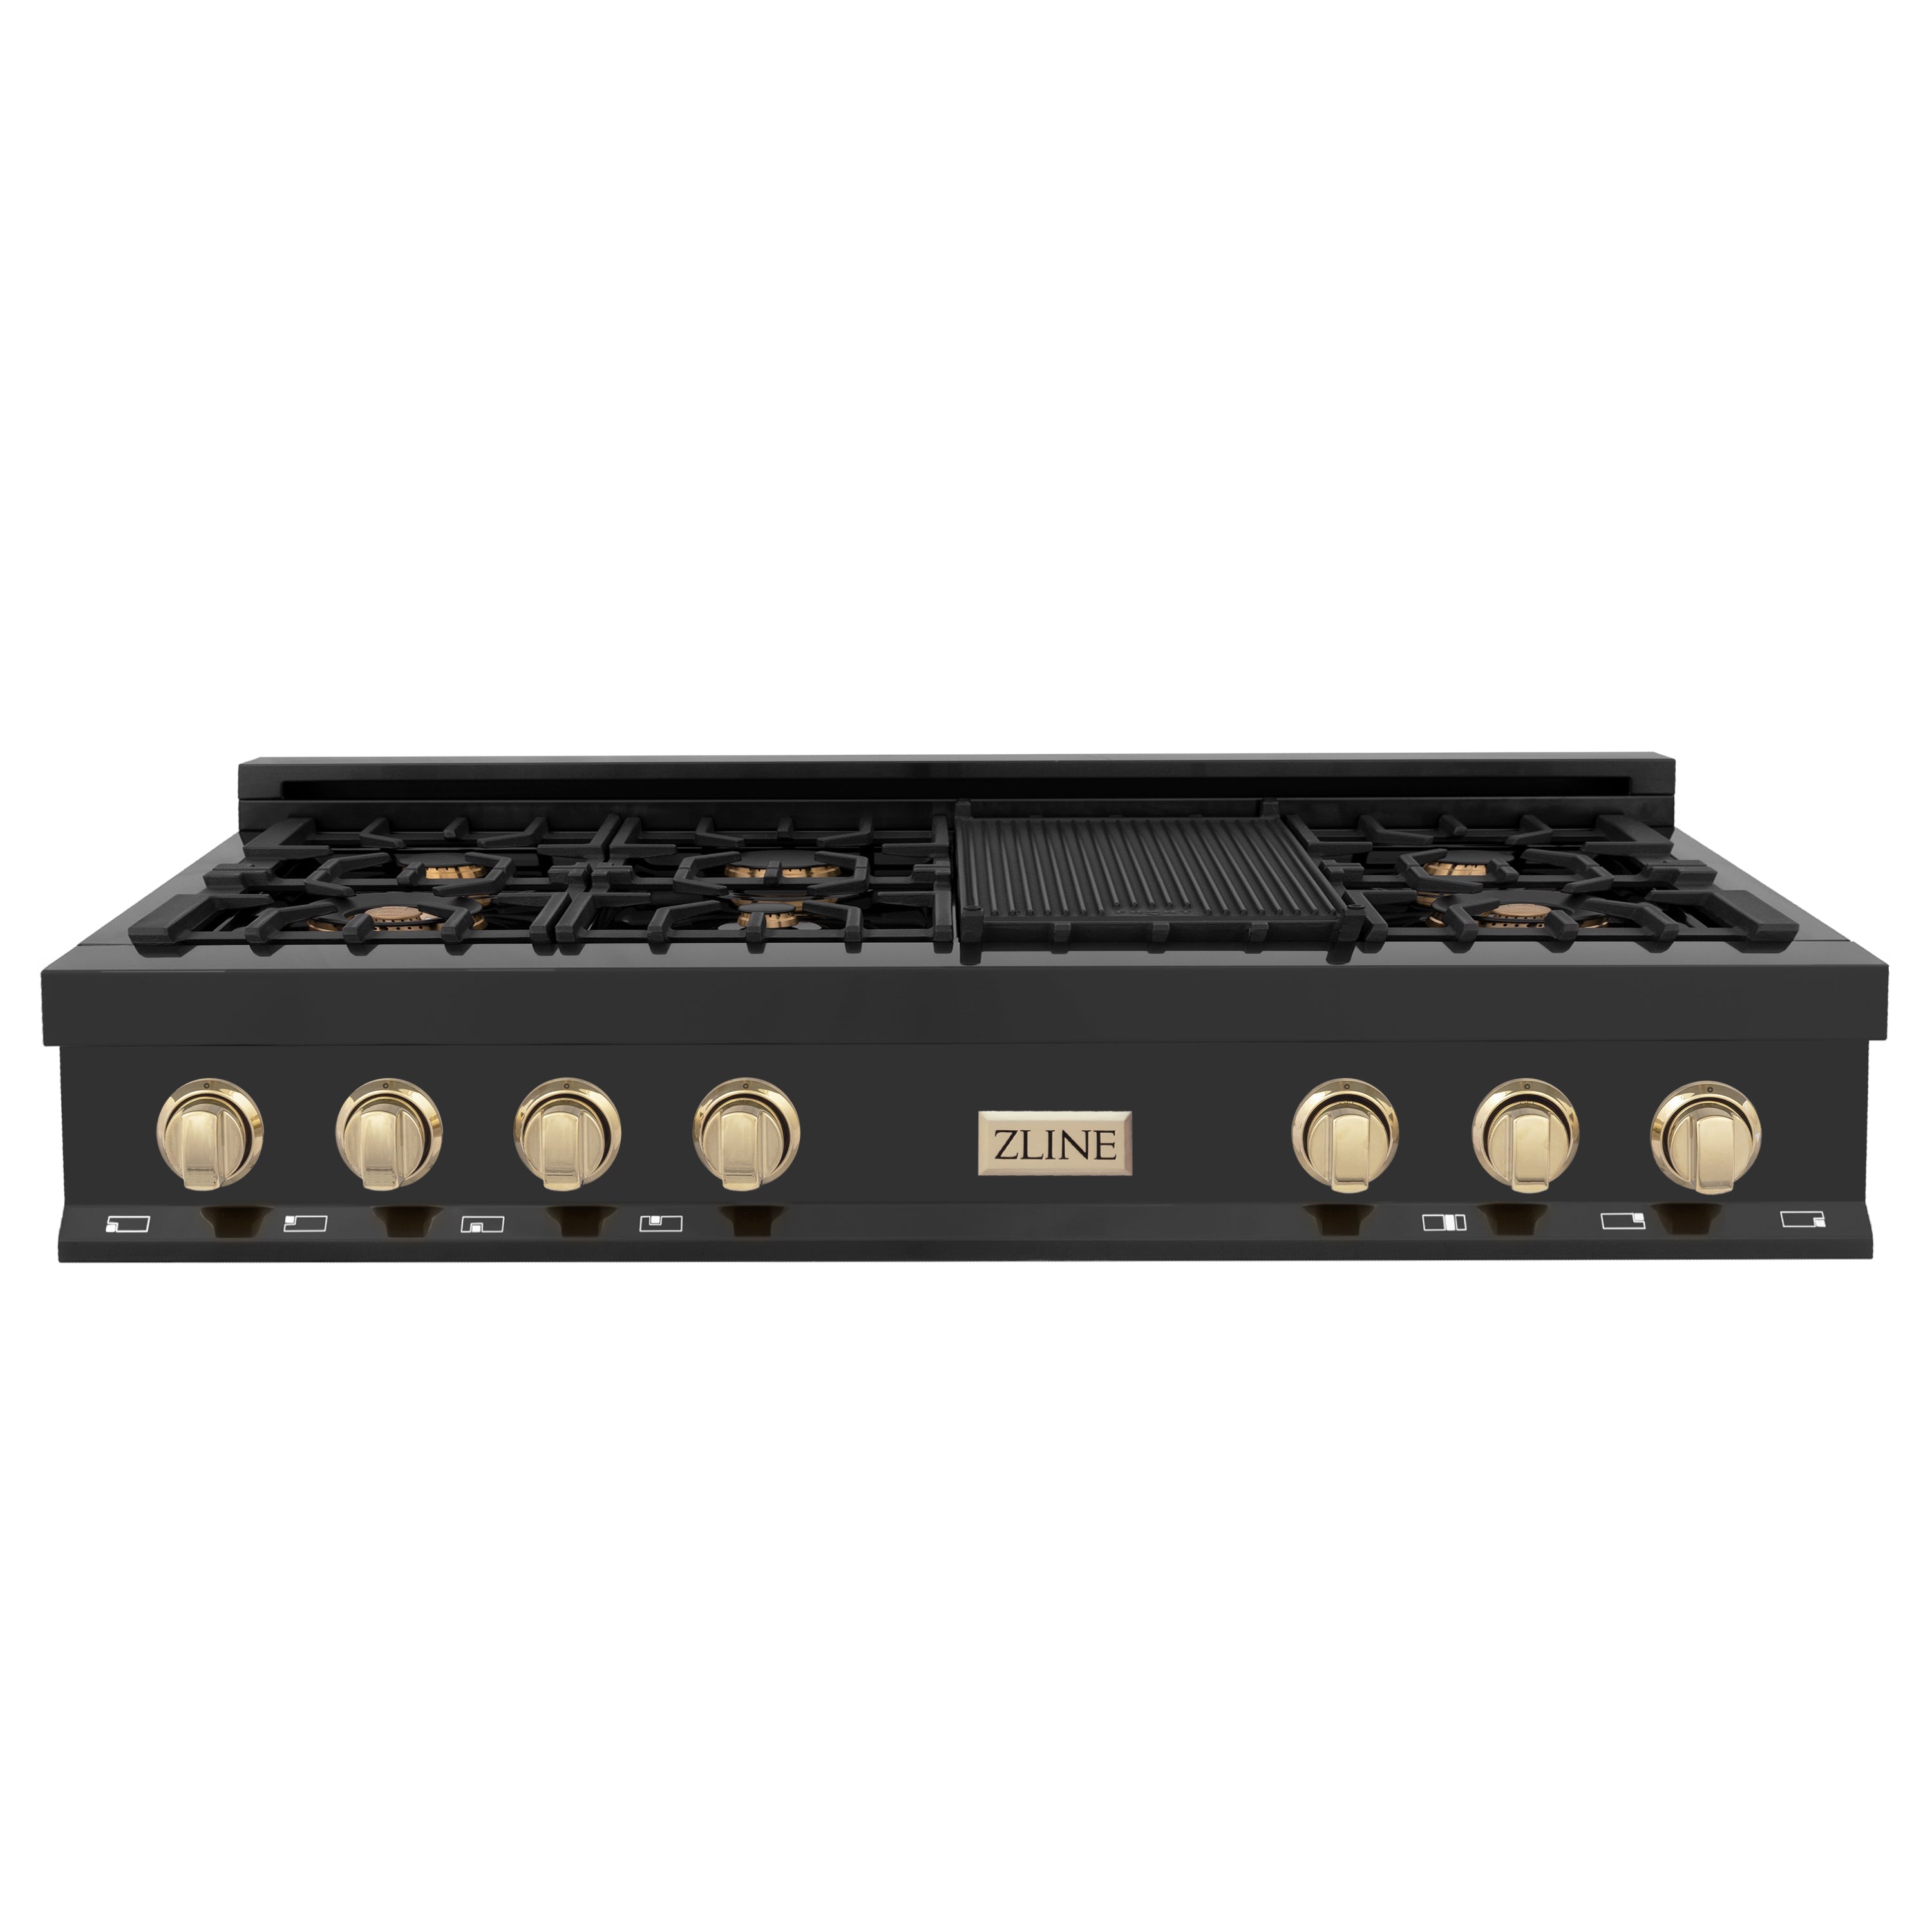 ZLINE Autograph Edition 48" Porcelain Rangetop with 7 Gas Burners in Black Stainless Steel and Accents (RTBZ-48)